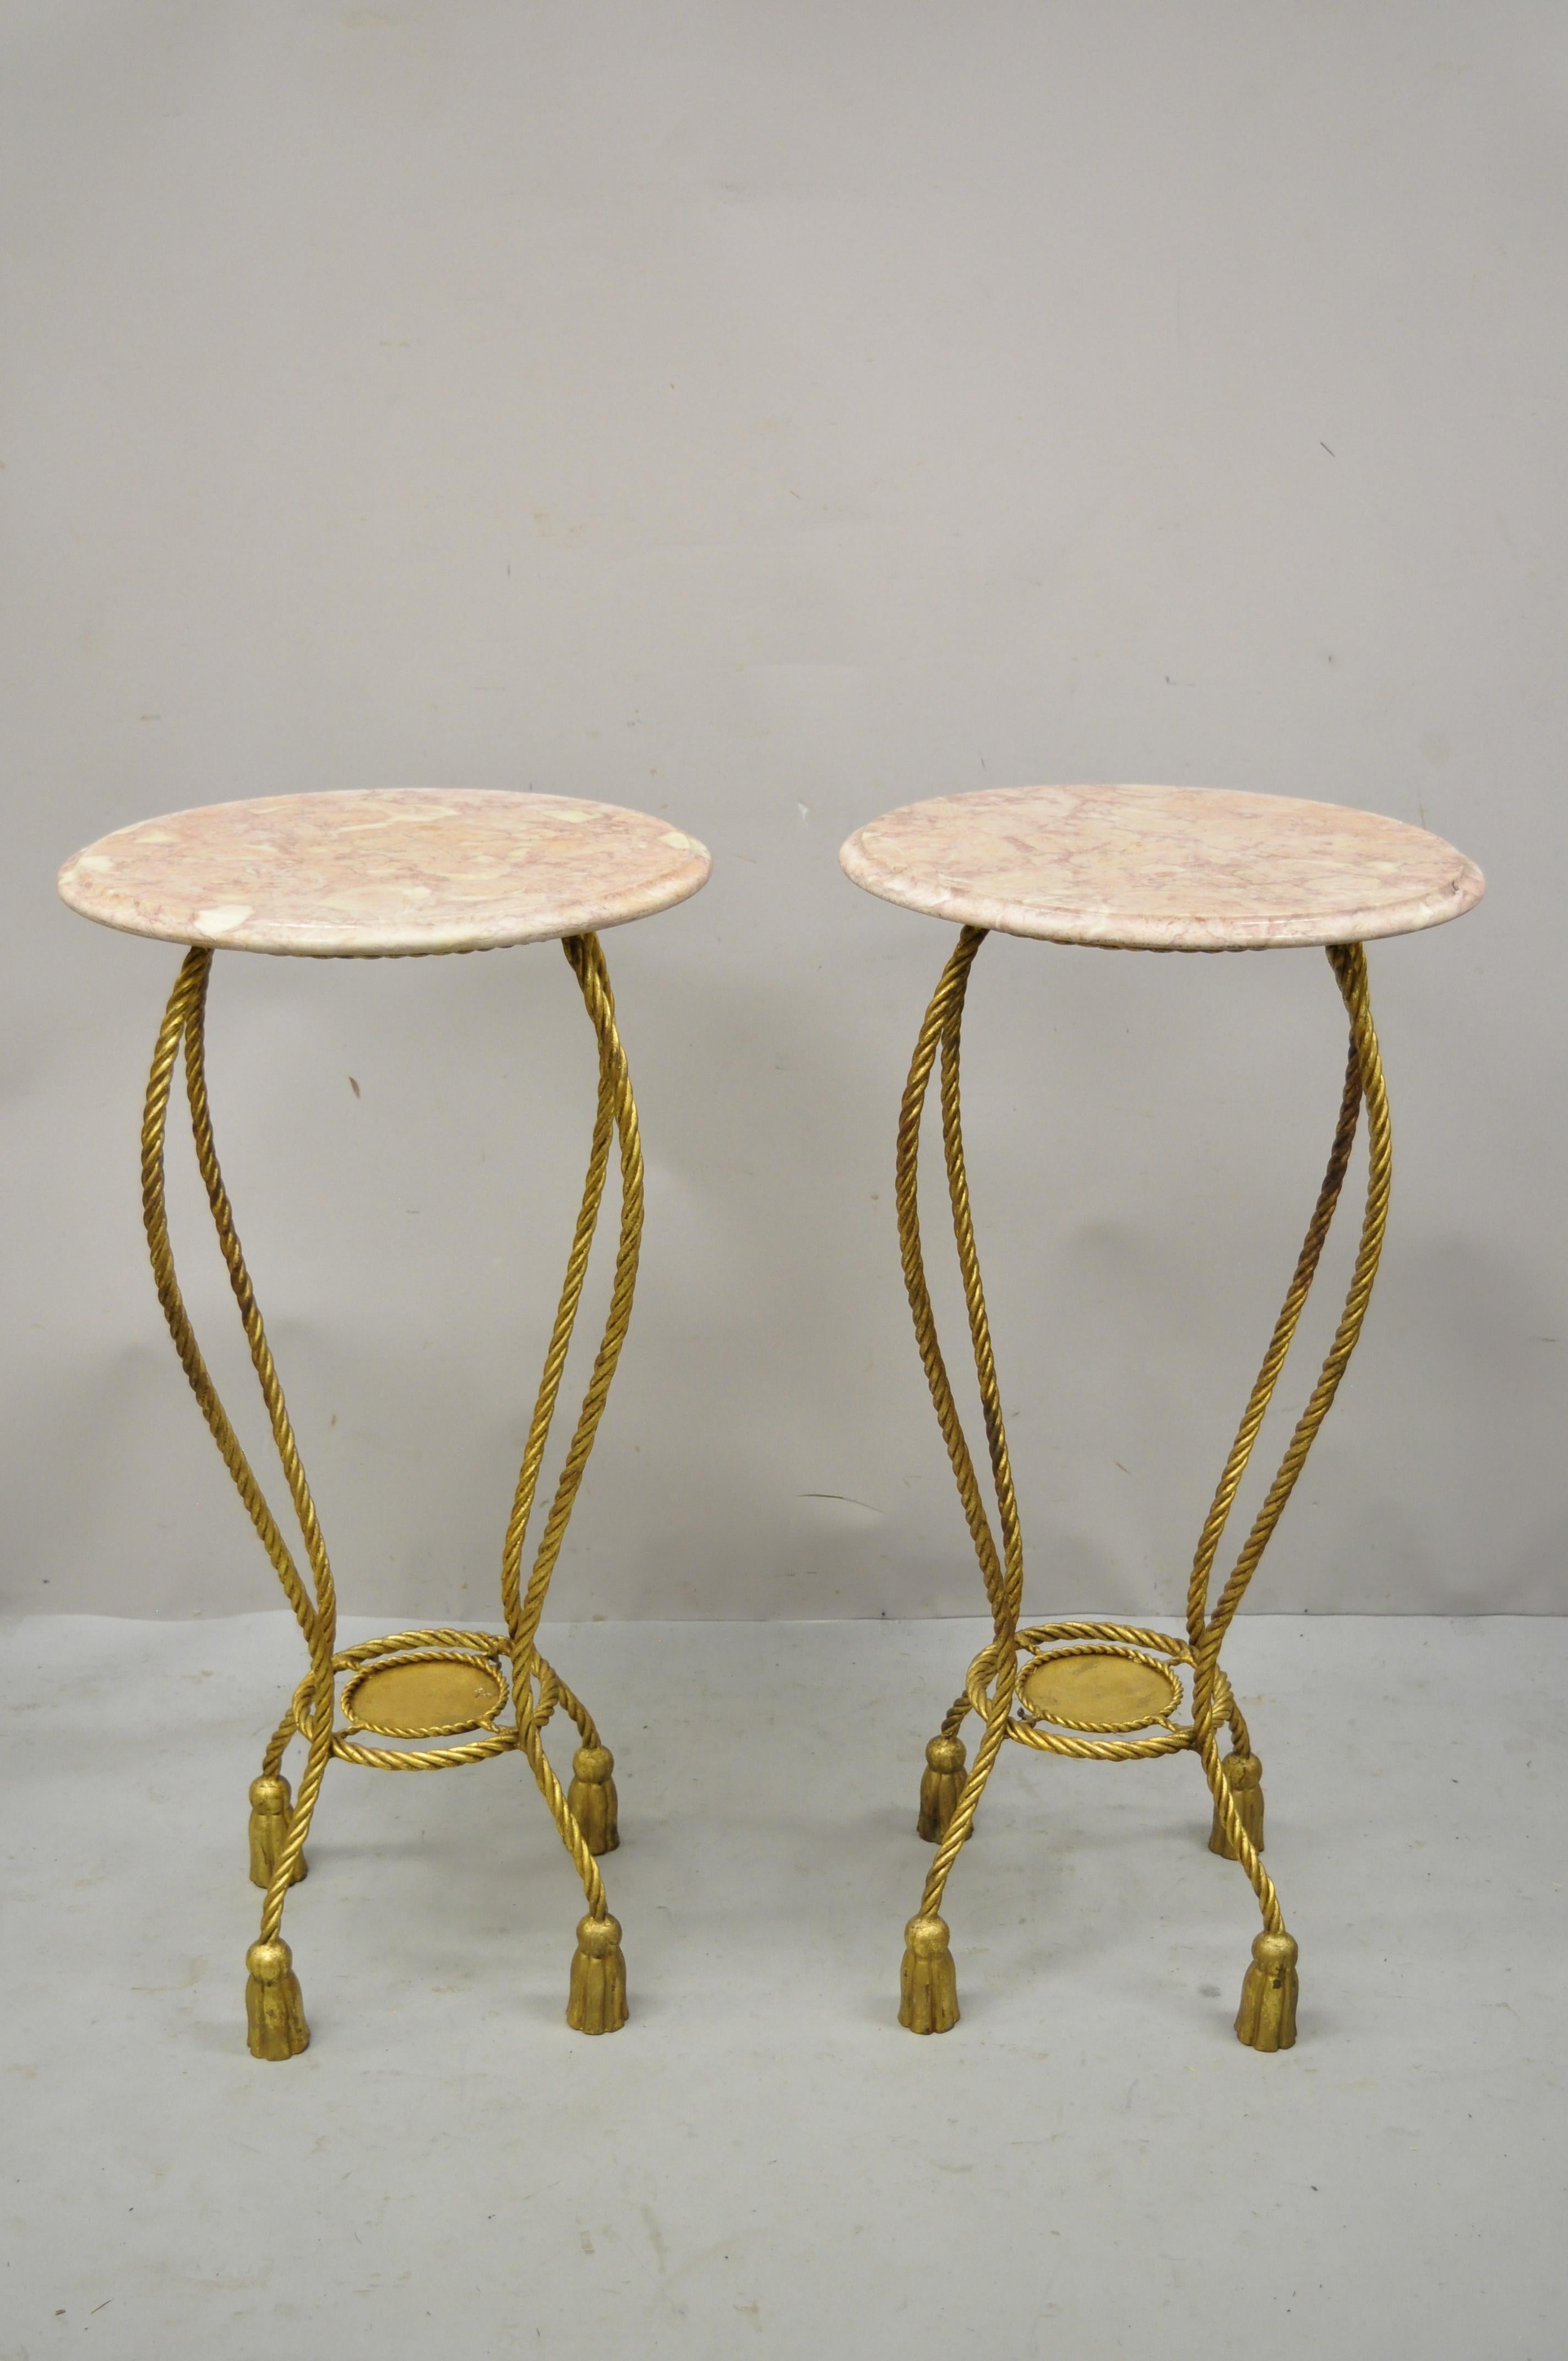 Italian Gold Gilt Iron Rope Tassel Marble Top Tall Pedestal Plant Stand, a Pair For Sale 3